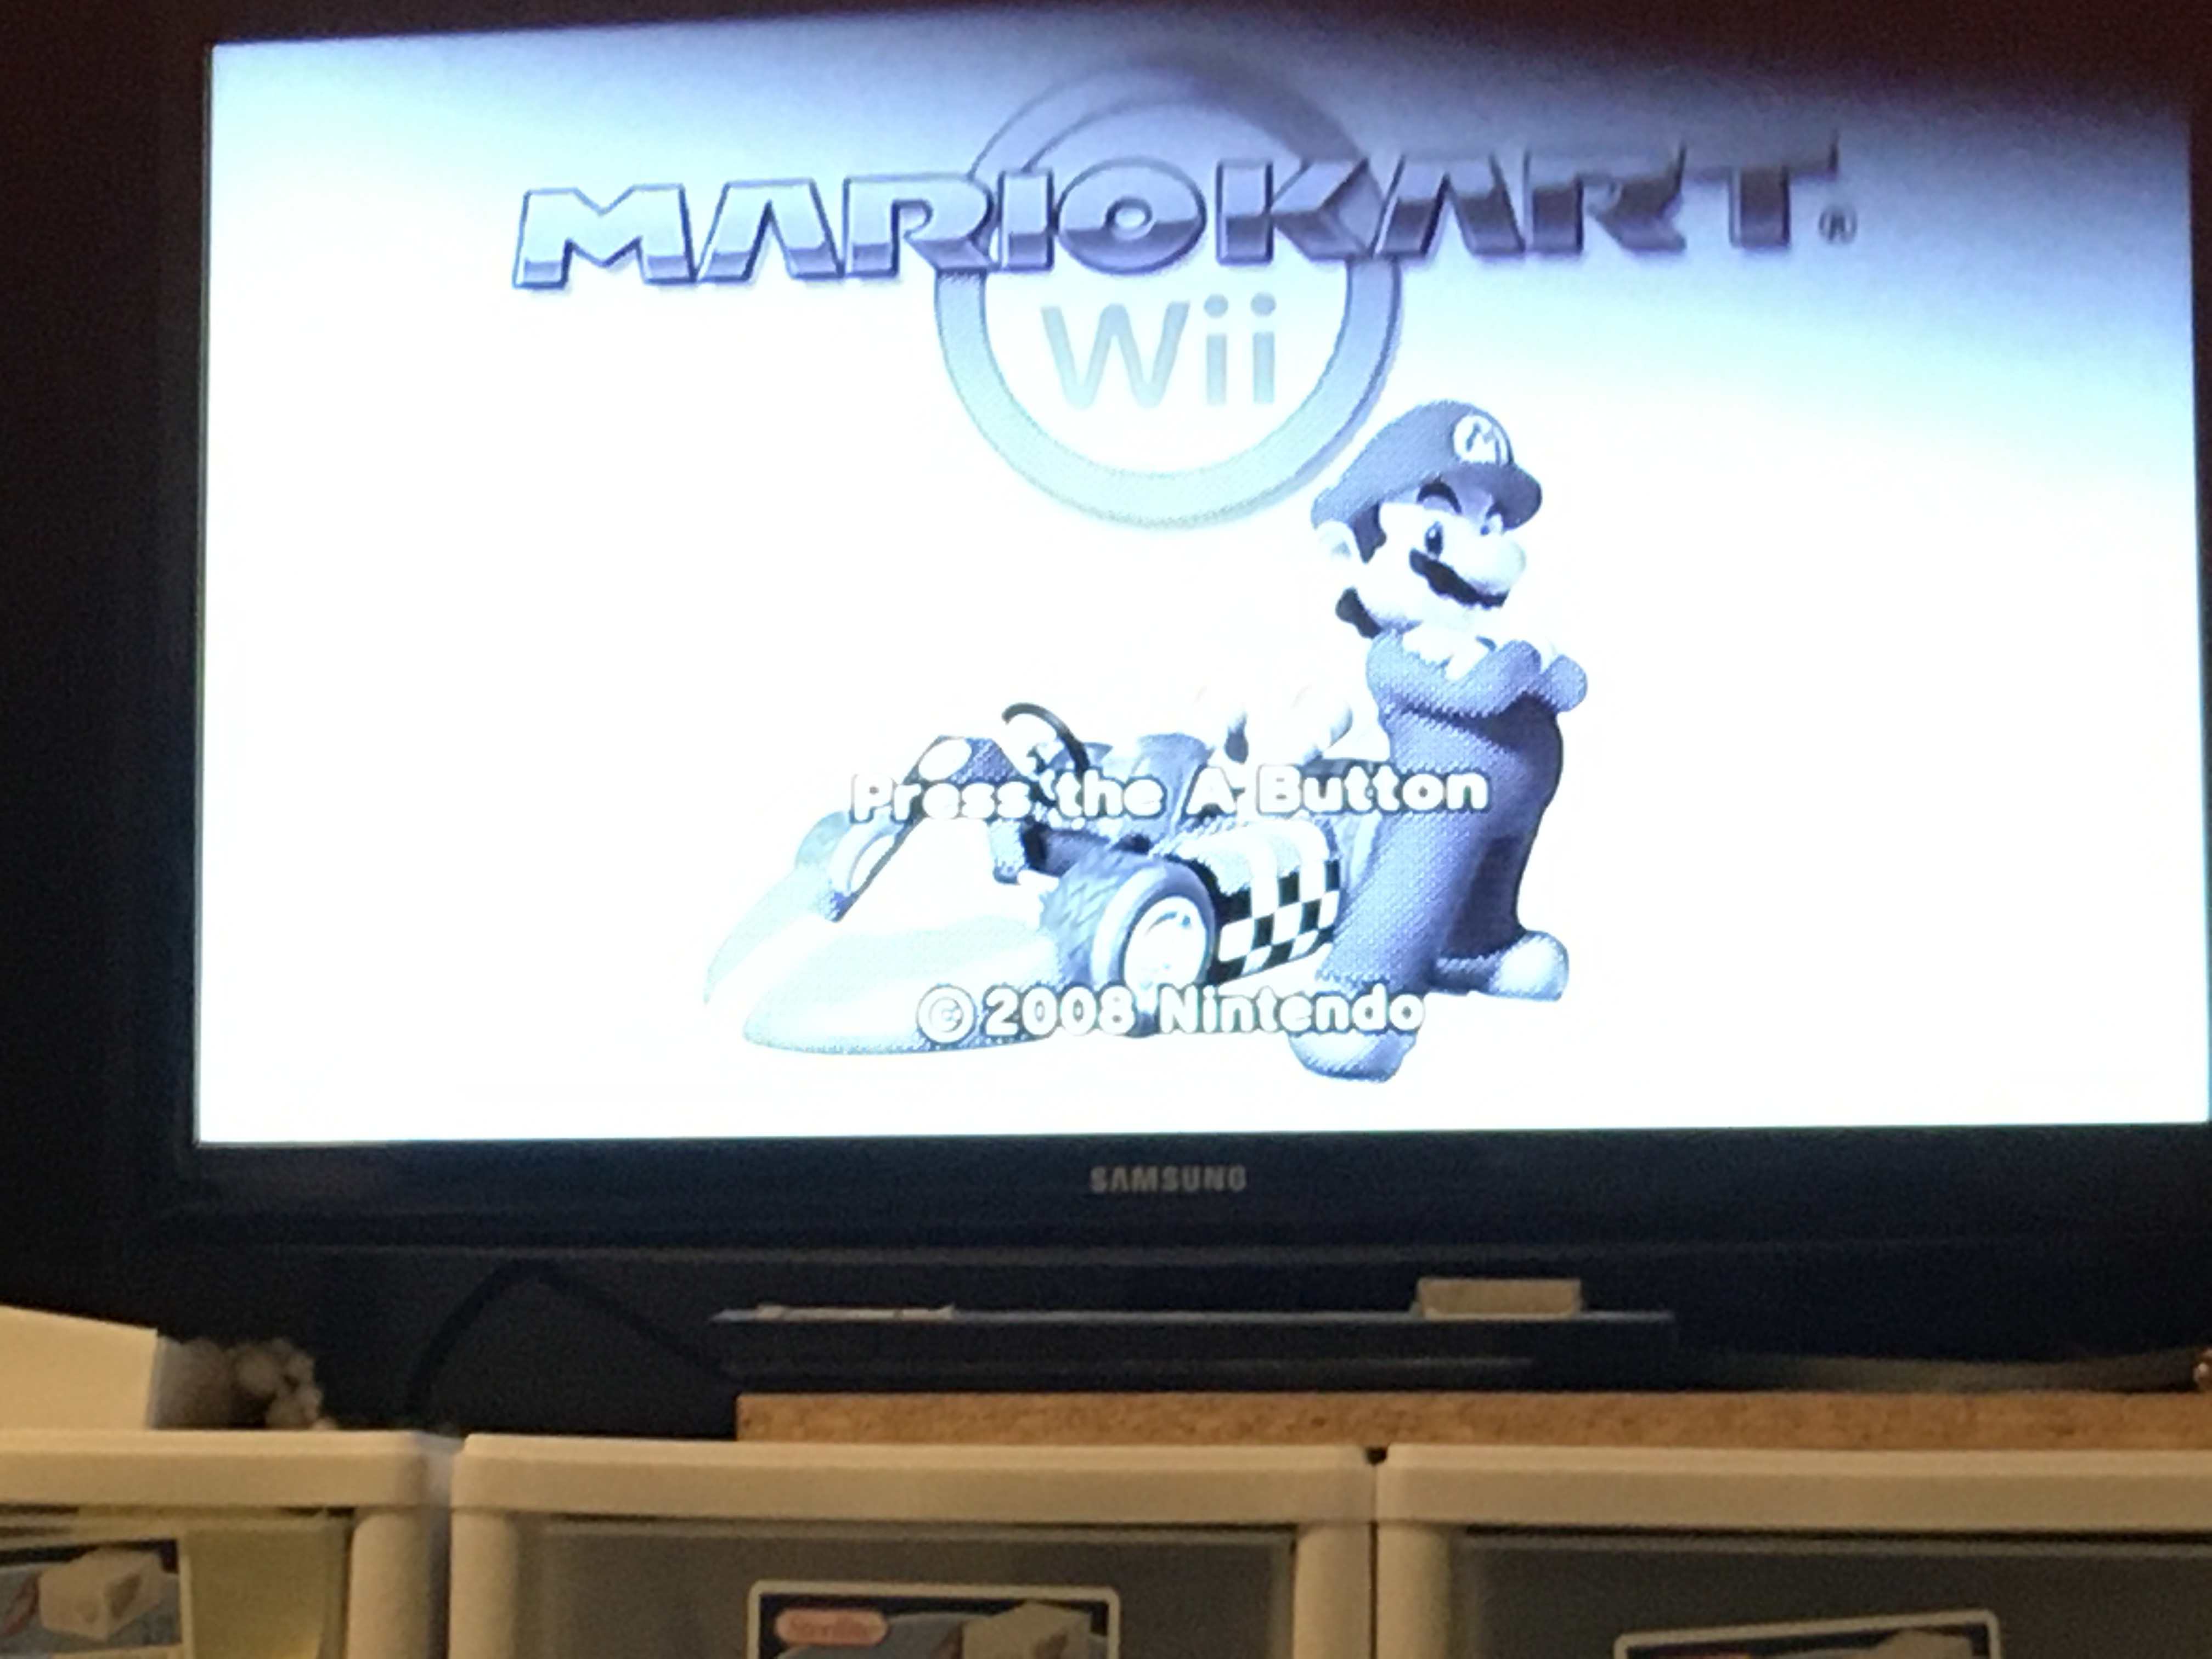 wii black and white on samsung tv